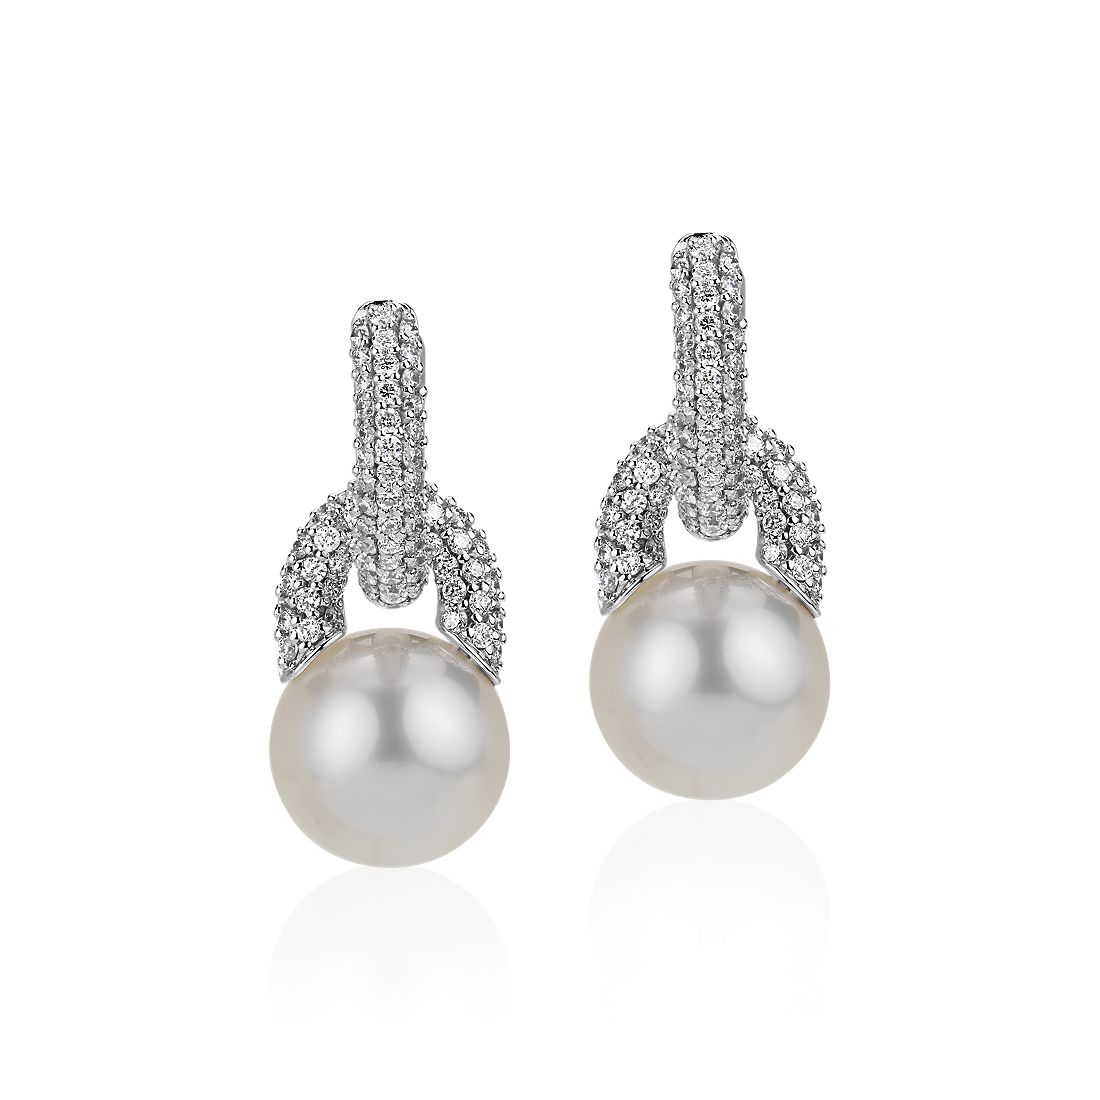 Diamond Door Knocker Earrings with South Sea Cultured Pearls in 18k White  Gold (9.5-10mm)